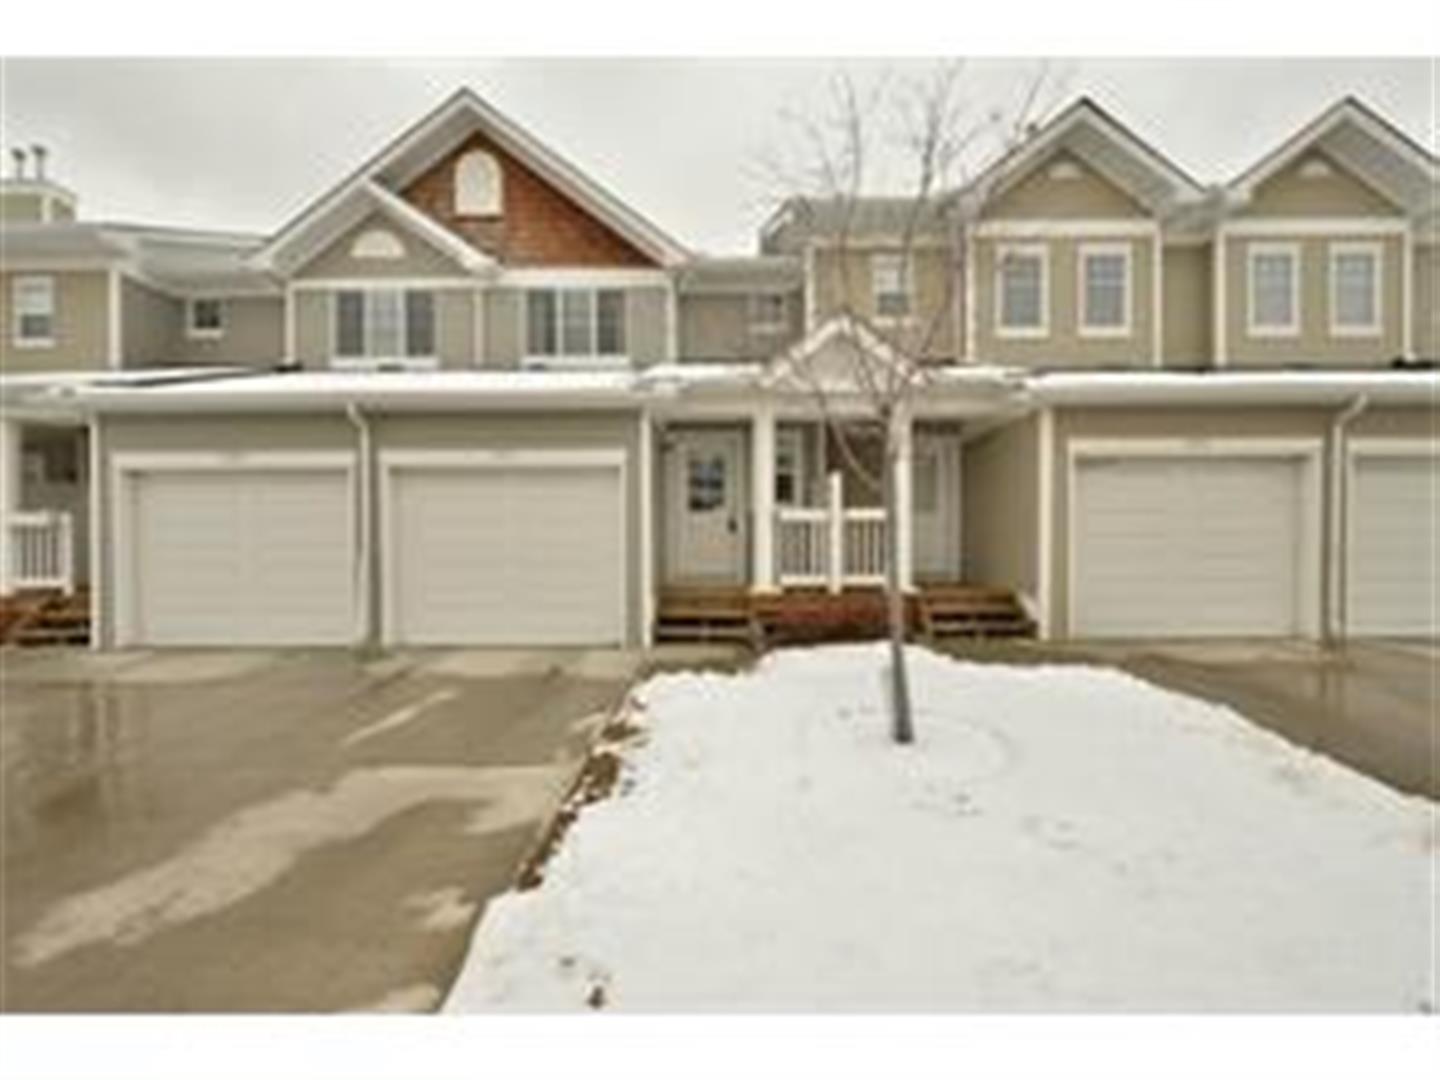 2 Master bedroom with ensuite townhouse in Country HIlls Village!